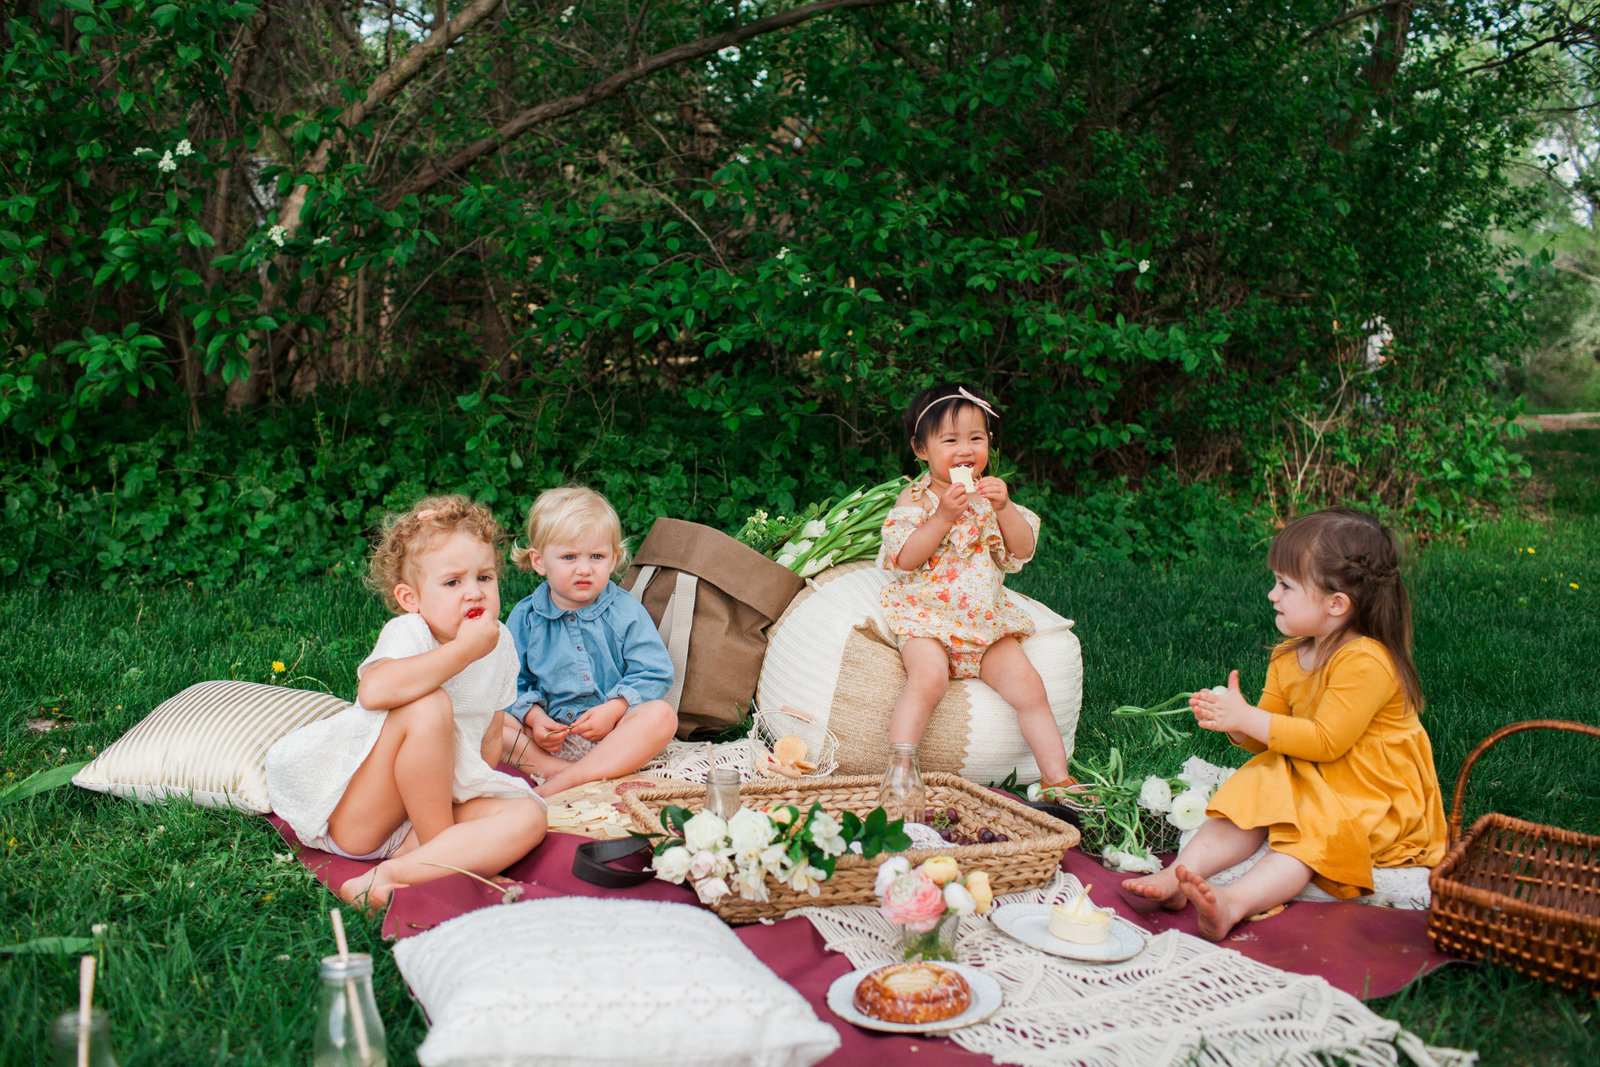 7 Tips For A Successful Outdoor Picnic With Kids | SandyALaMode